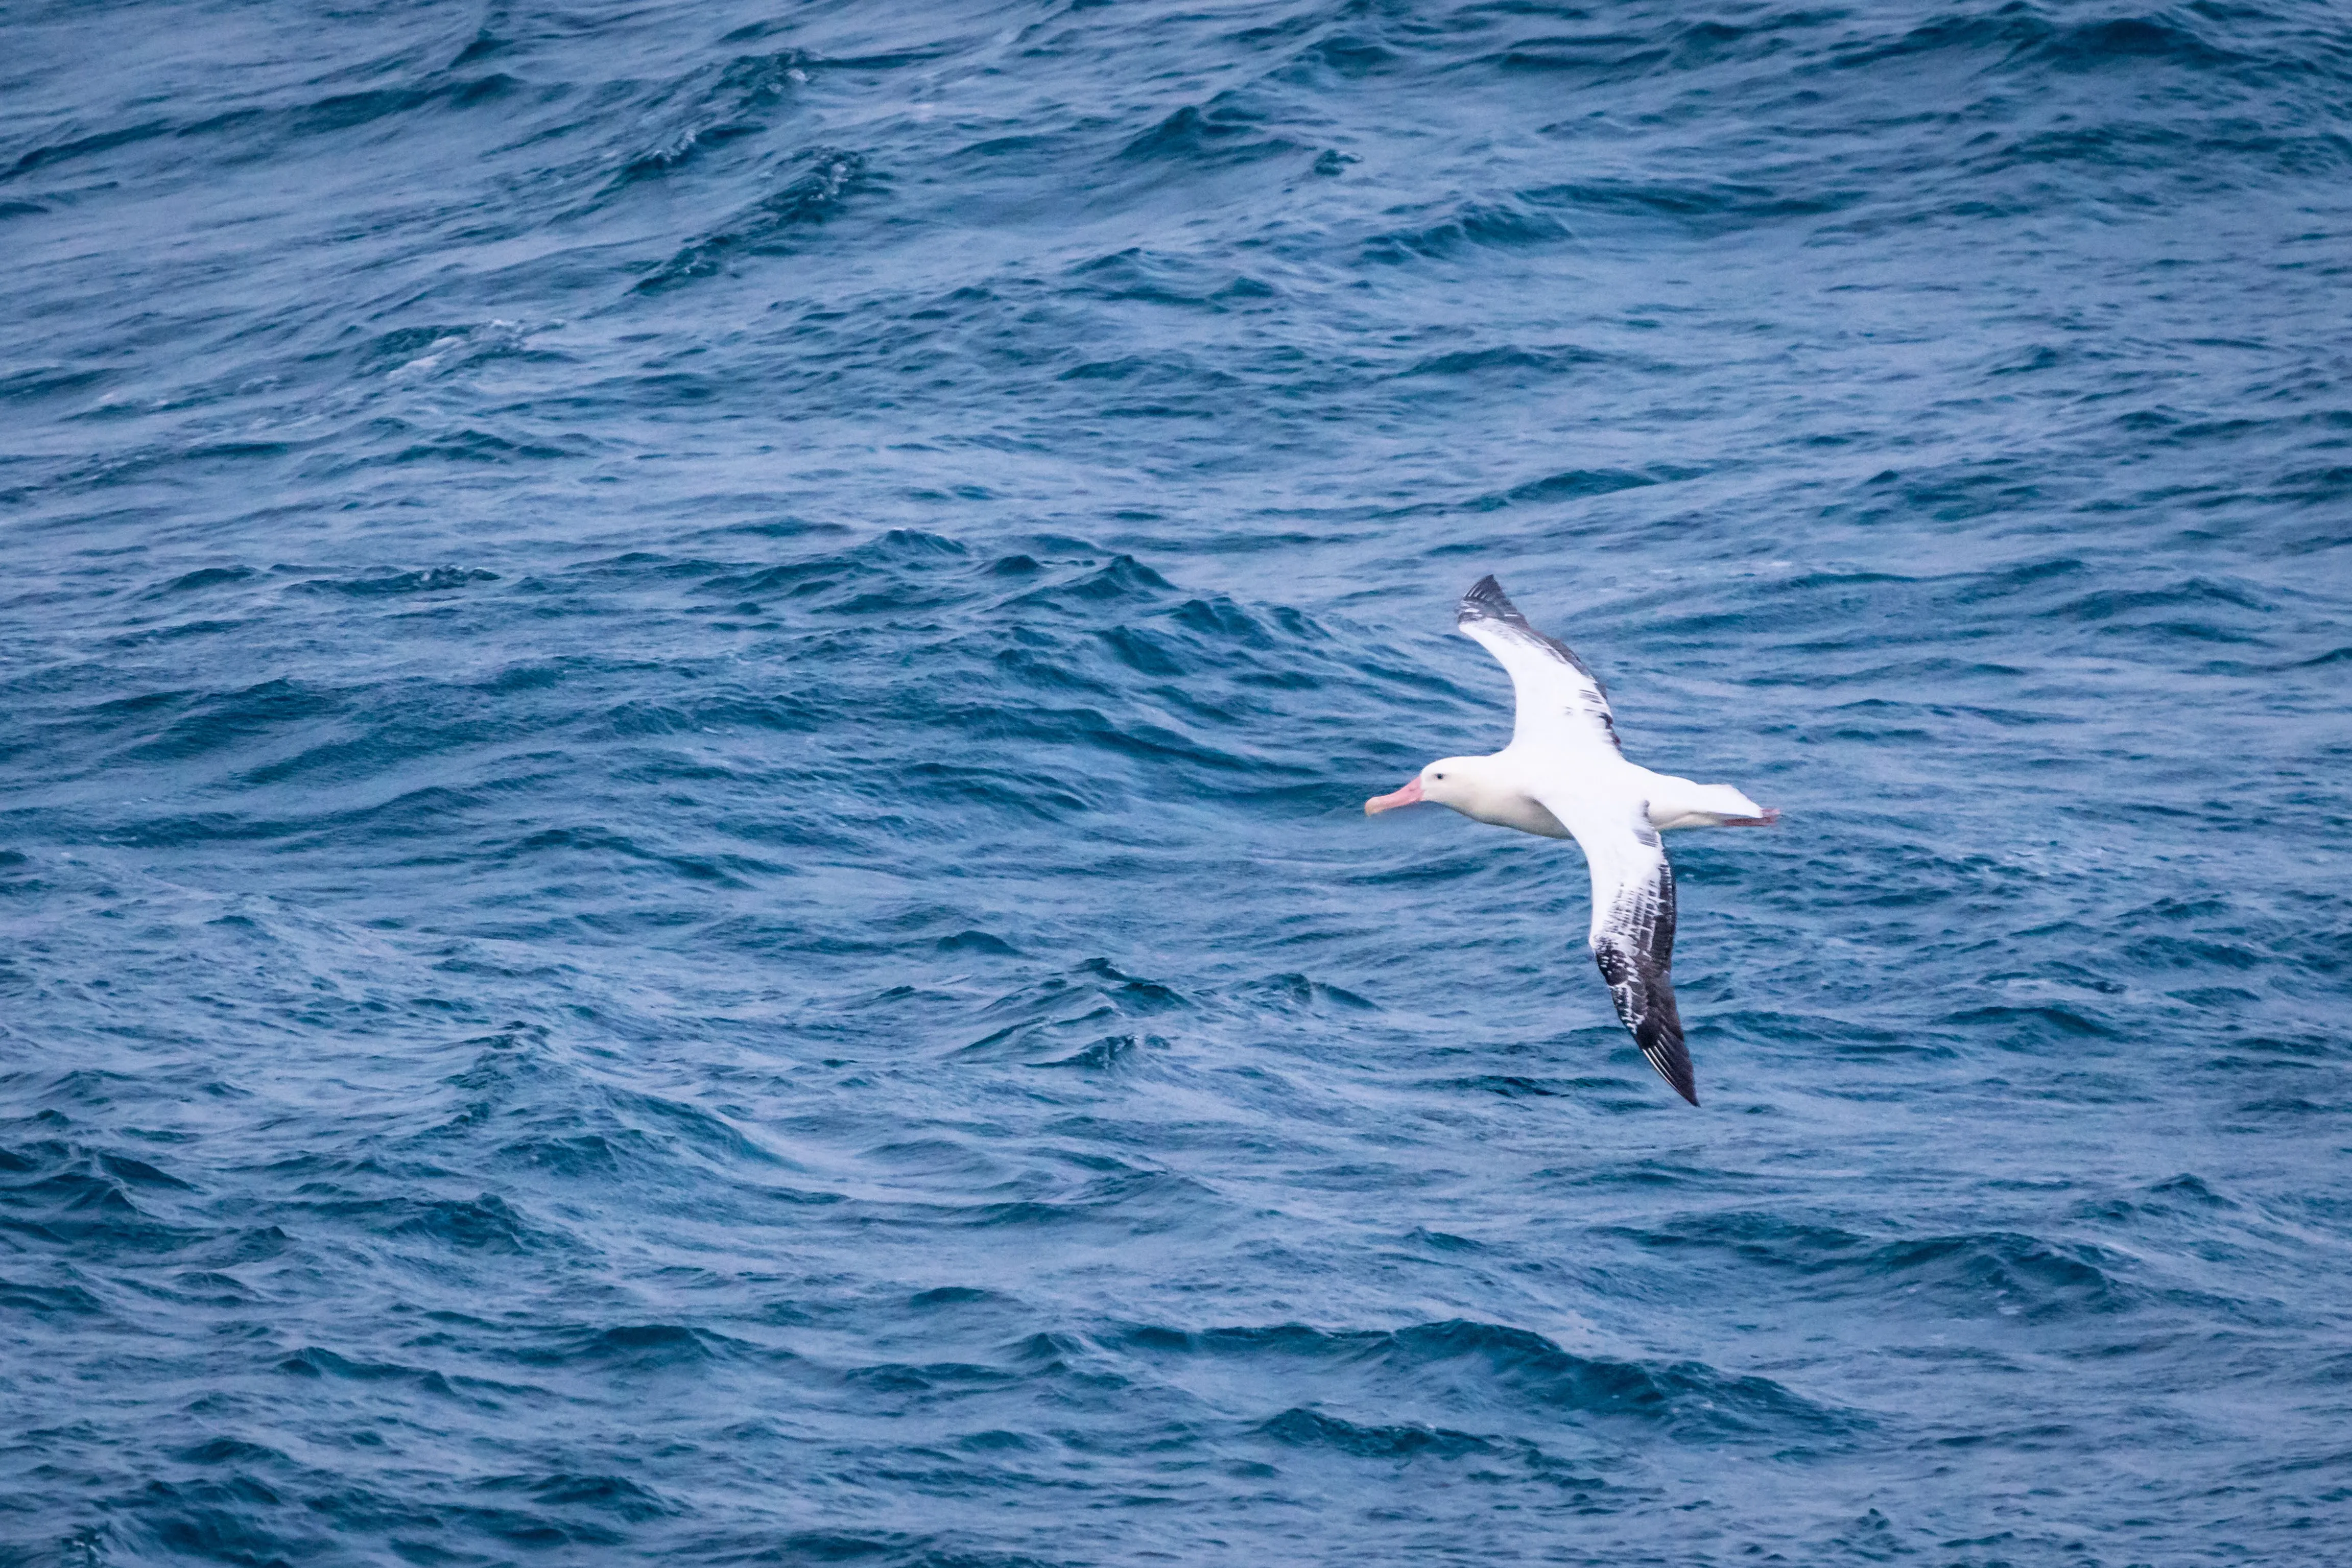 Photo of a wandering albatross: a large white bird with a pale orange bill and black wingtips flying low over deep blue water.